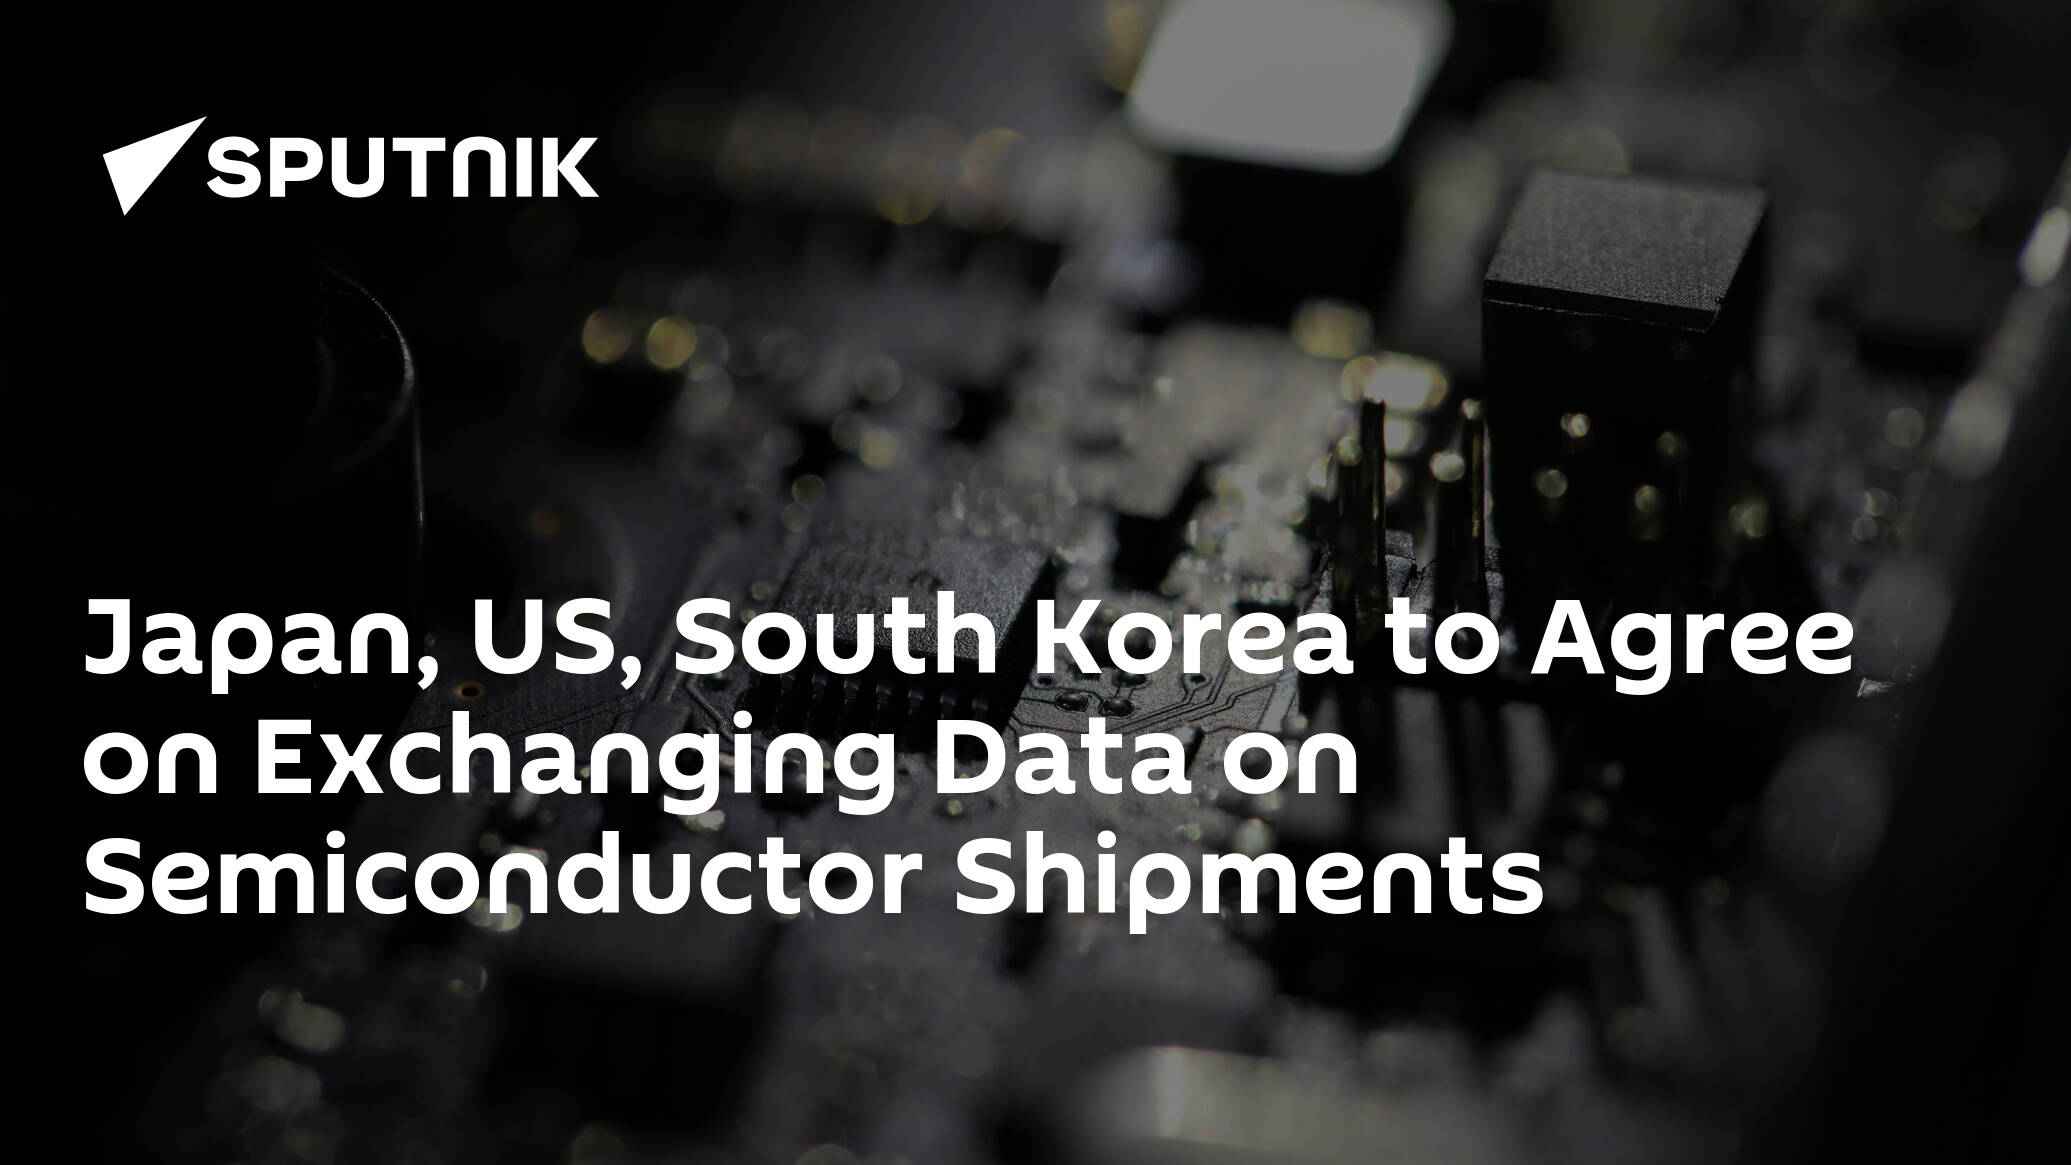 Japan, US, South Korea to Agree on Exchanging Data on Semiconductor Shipments